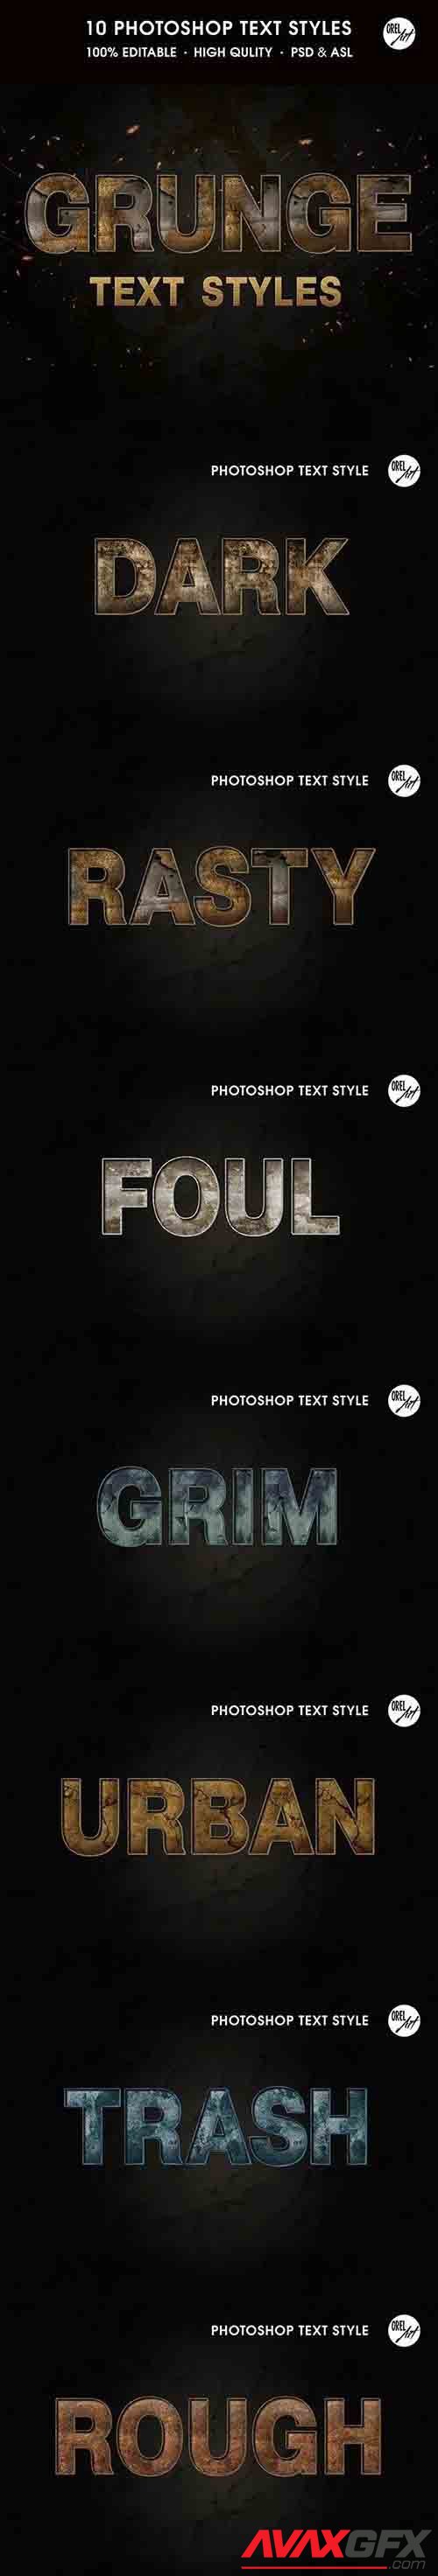 GraphicRiver - Grunge Text Styles 30386862